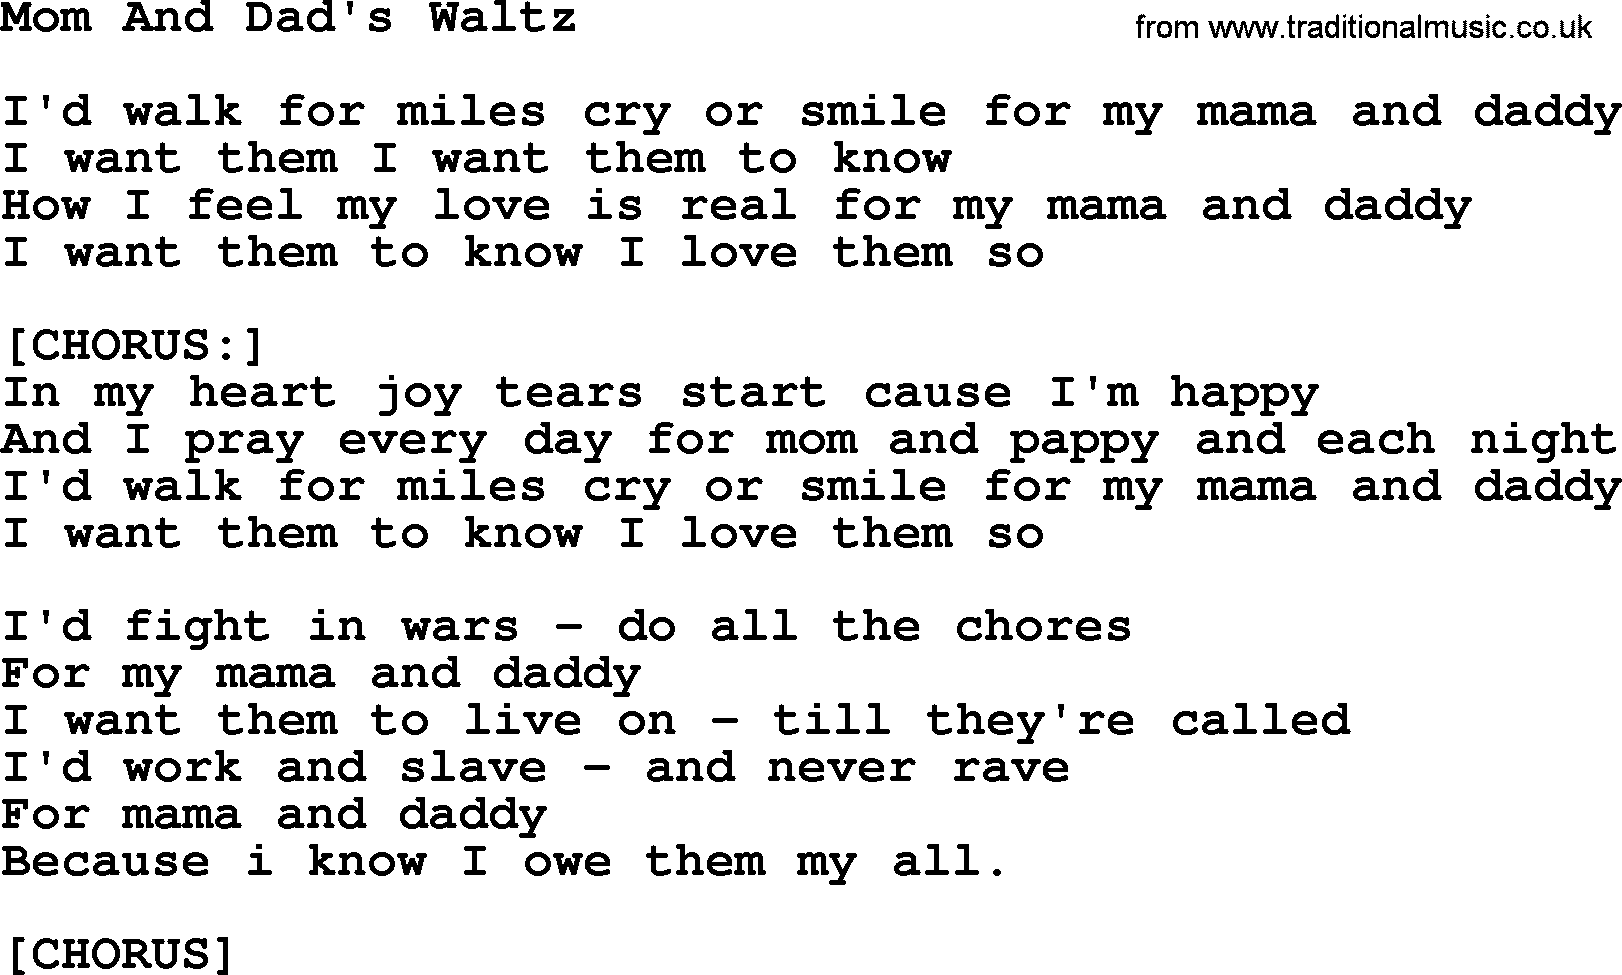 Willie Nelson song: Mom And Dad's Waltz lyrics